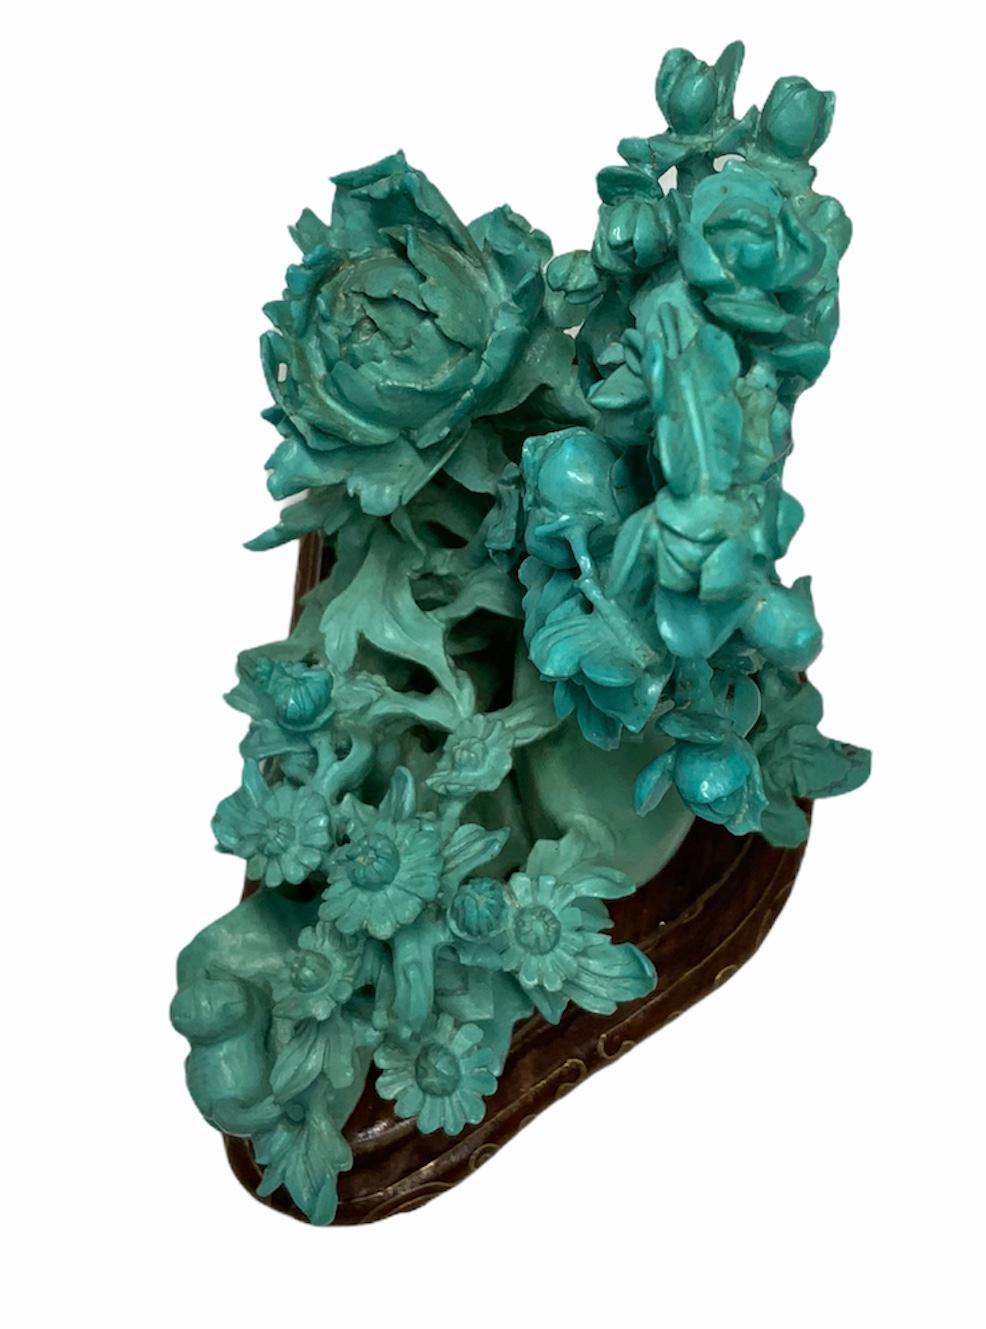 20th Century Chinese Carved Turquoise Vase and Flowers Table Decor